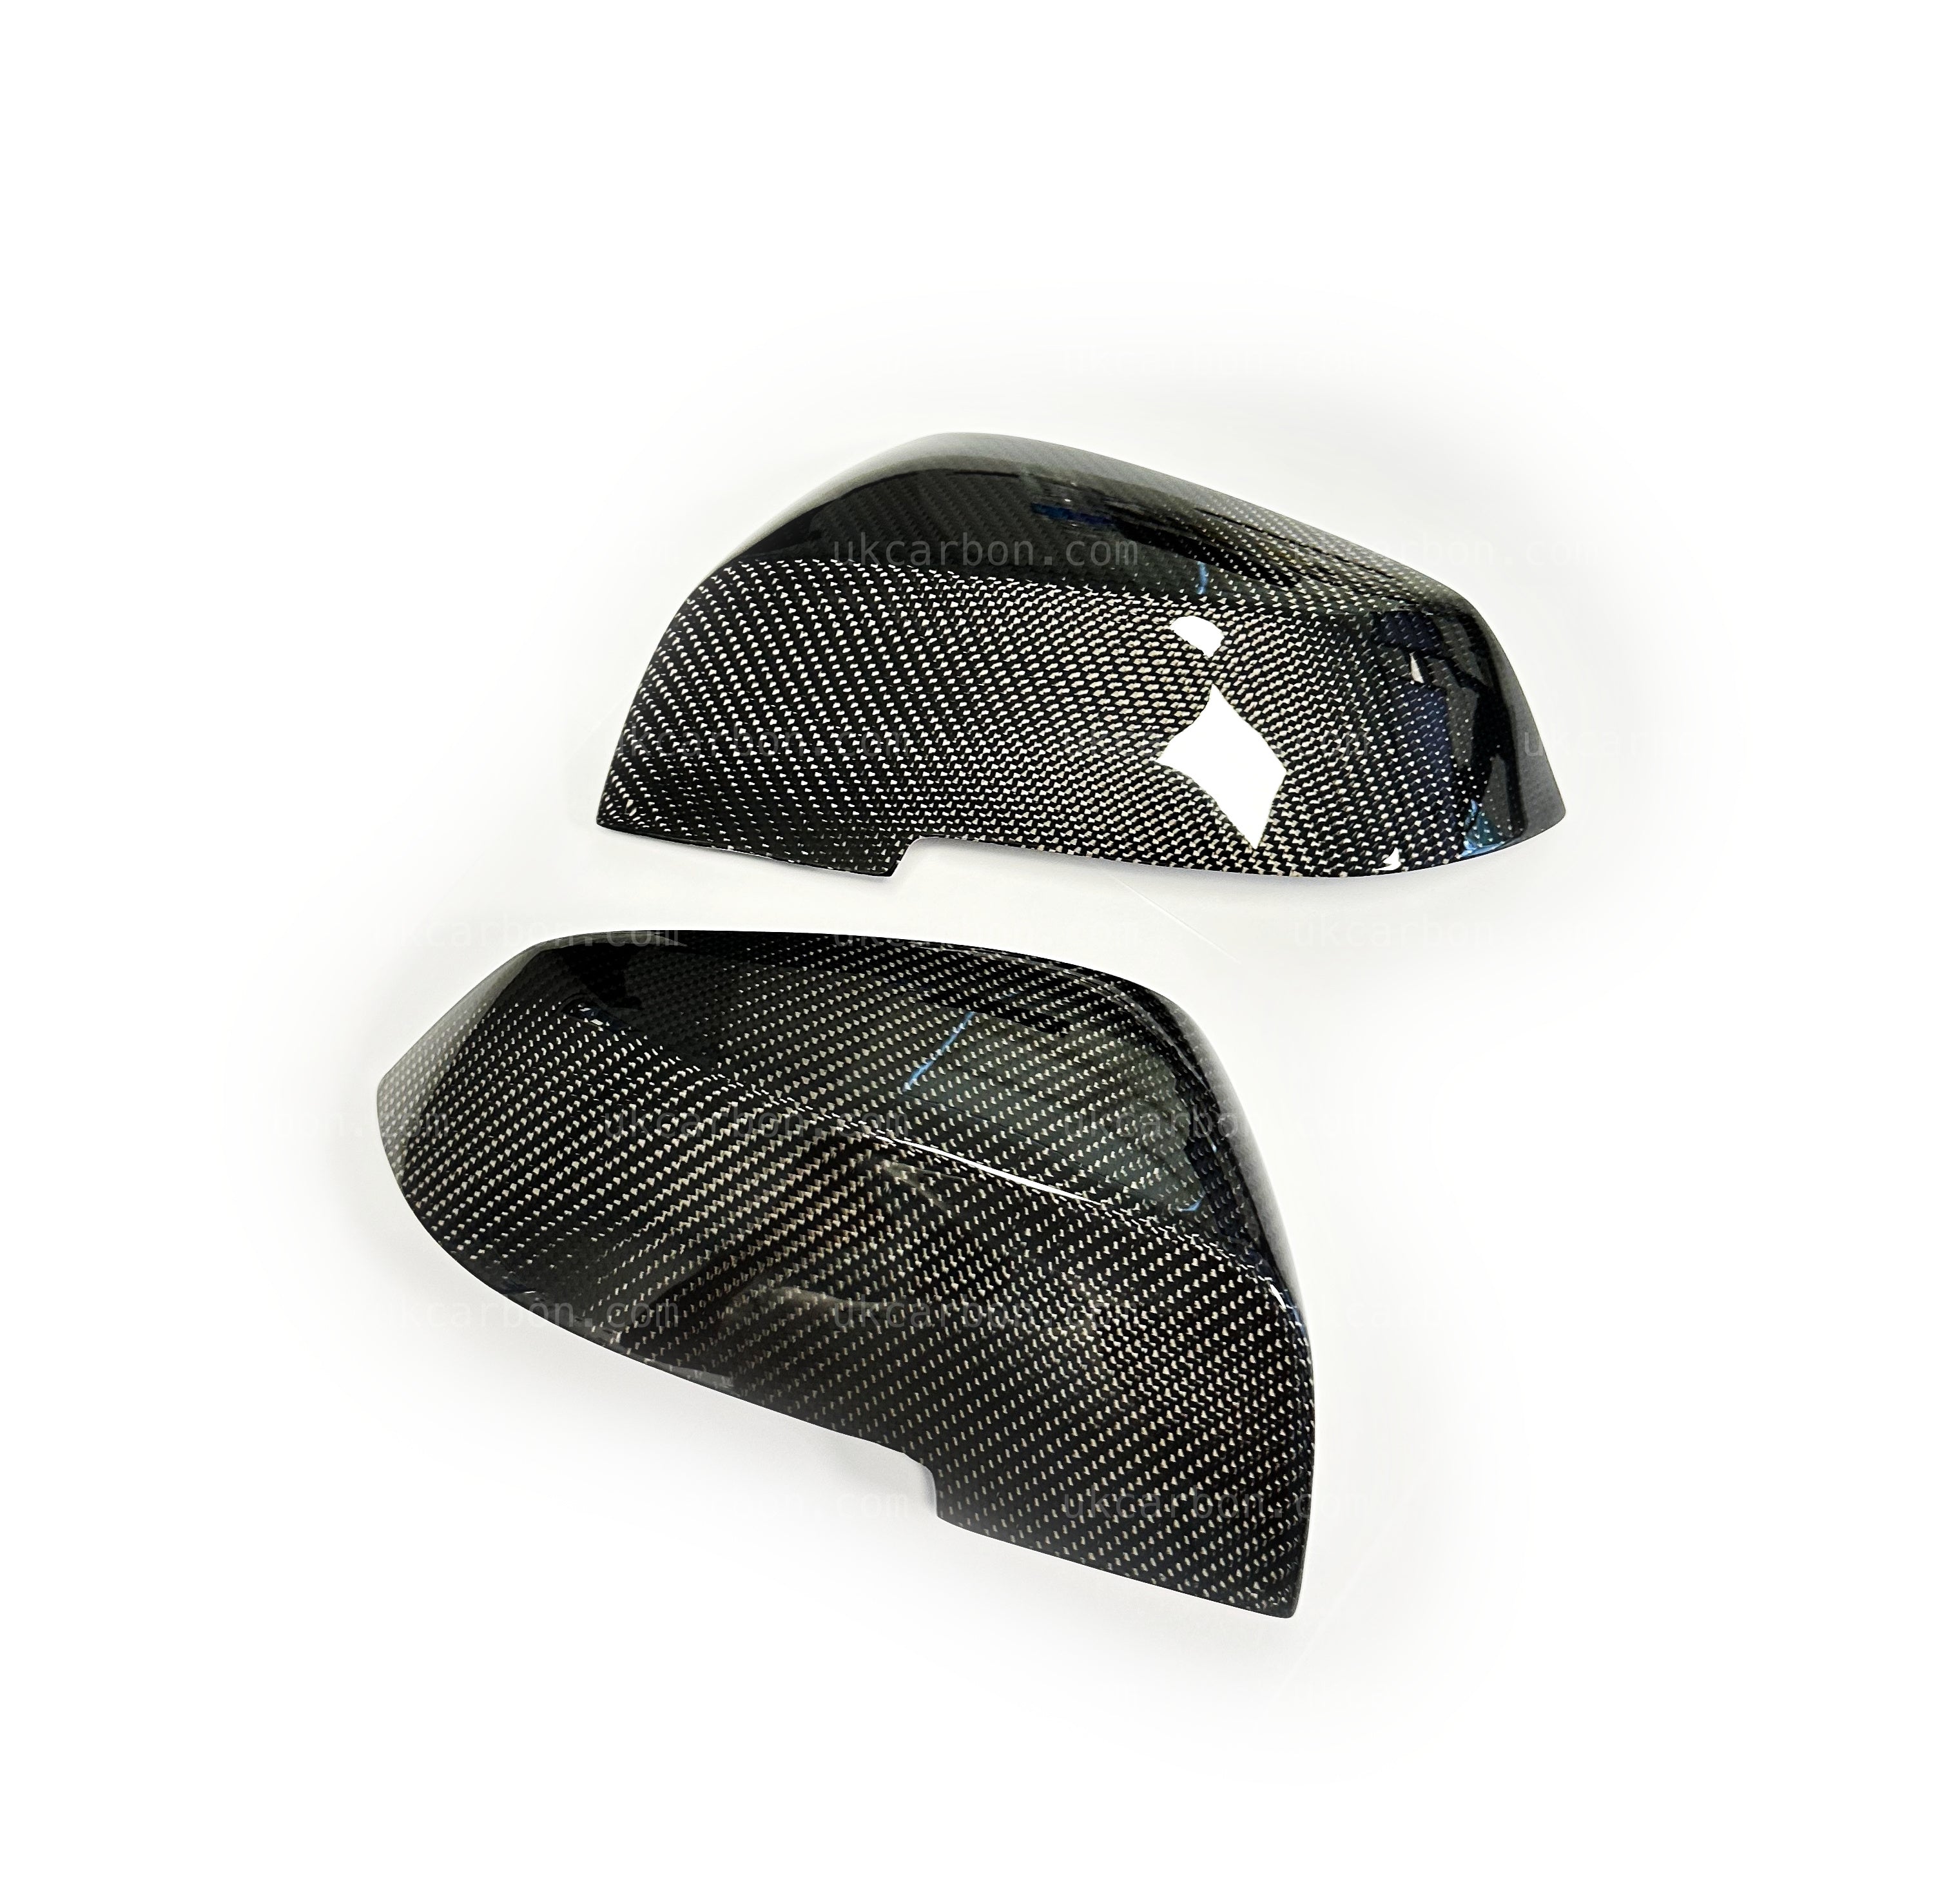 BMW 1 Series Carbon M Performance Wing Mirror Cover Replacements F20 by UKCarbon